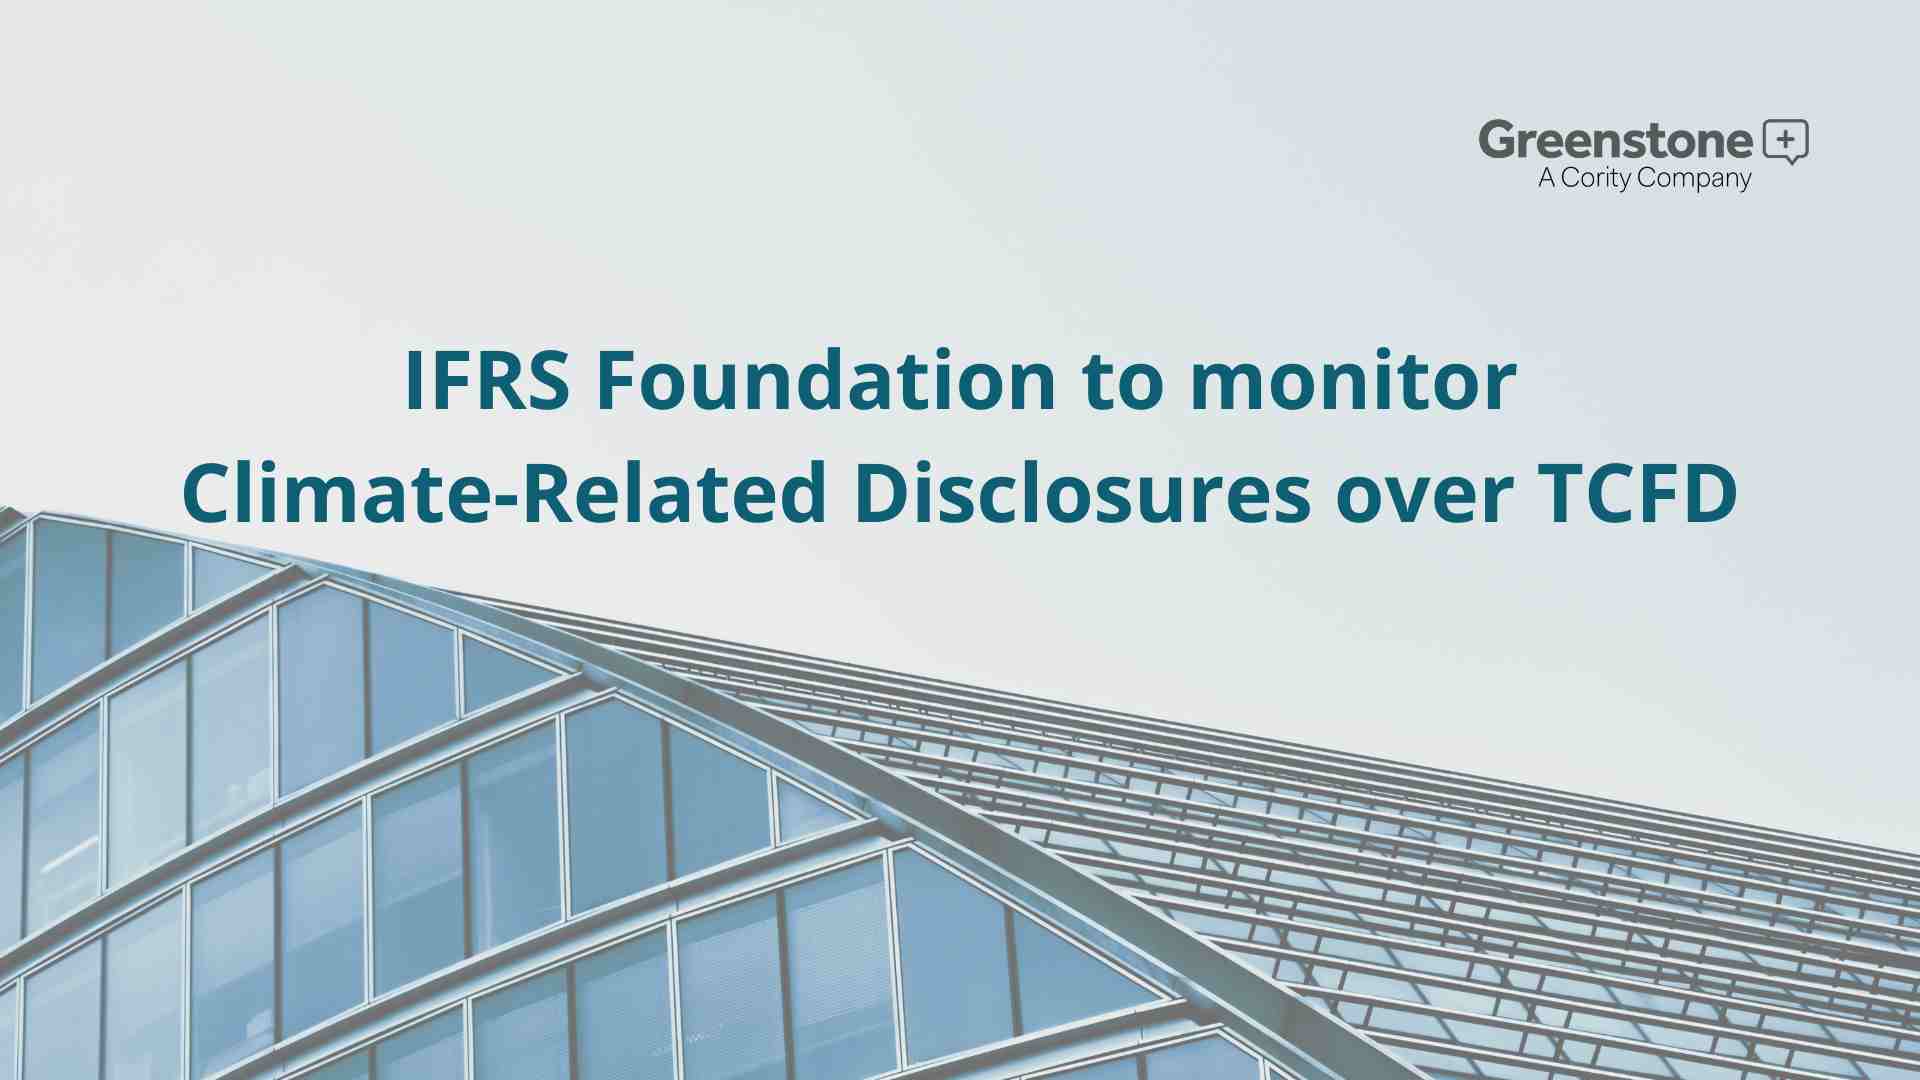 IFRS Foundation to monitor Climate-Related Disclosures over TCFD